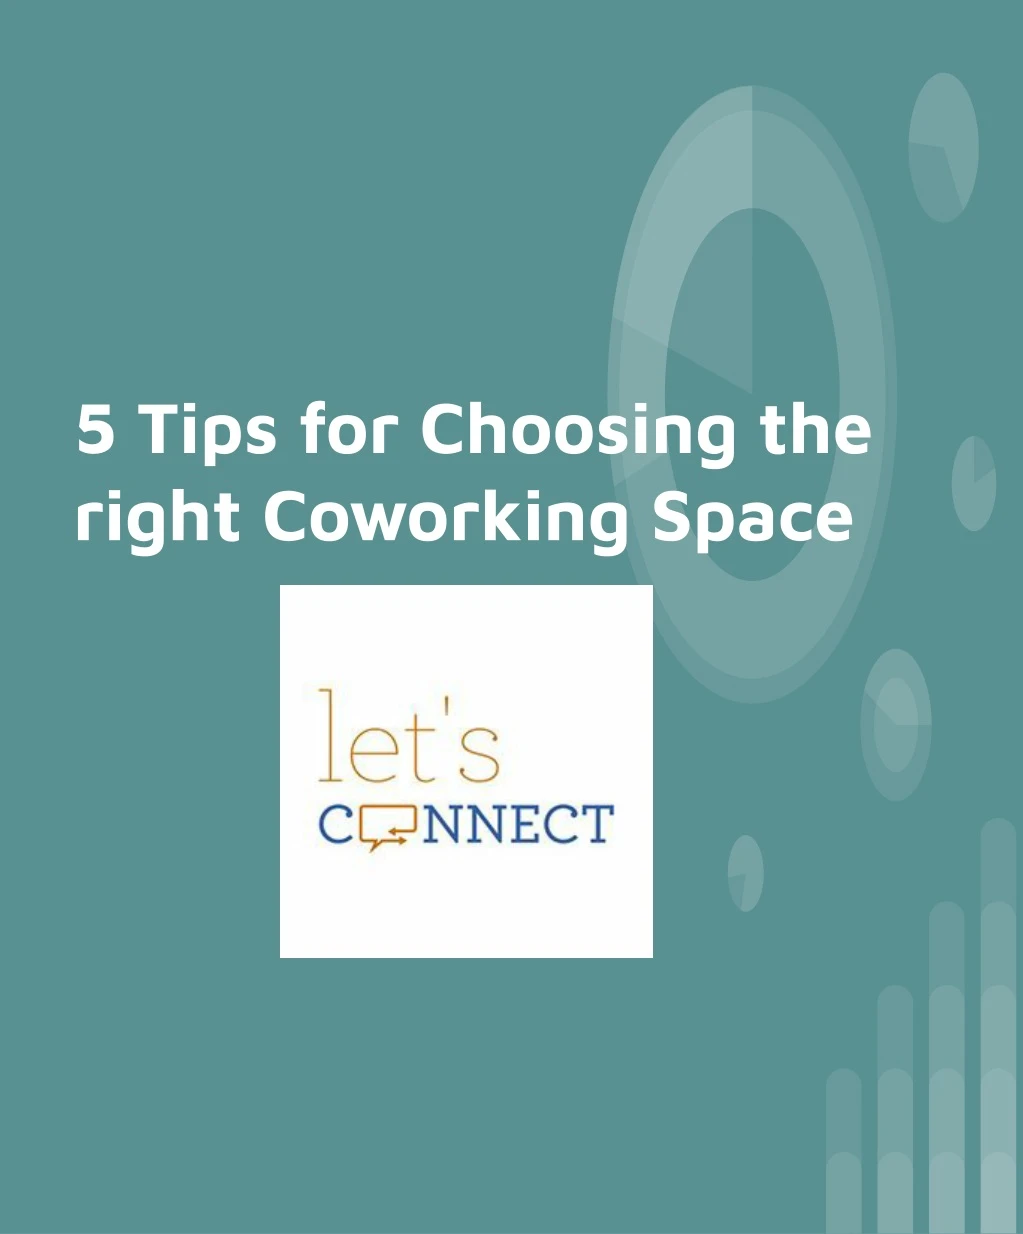 5 tips for choosing the right coworking space